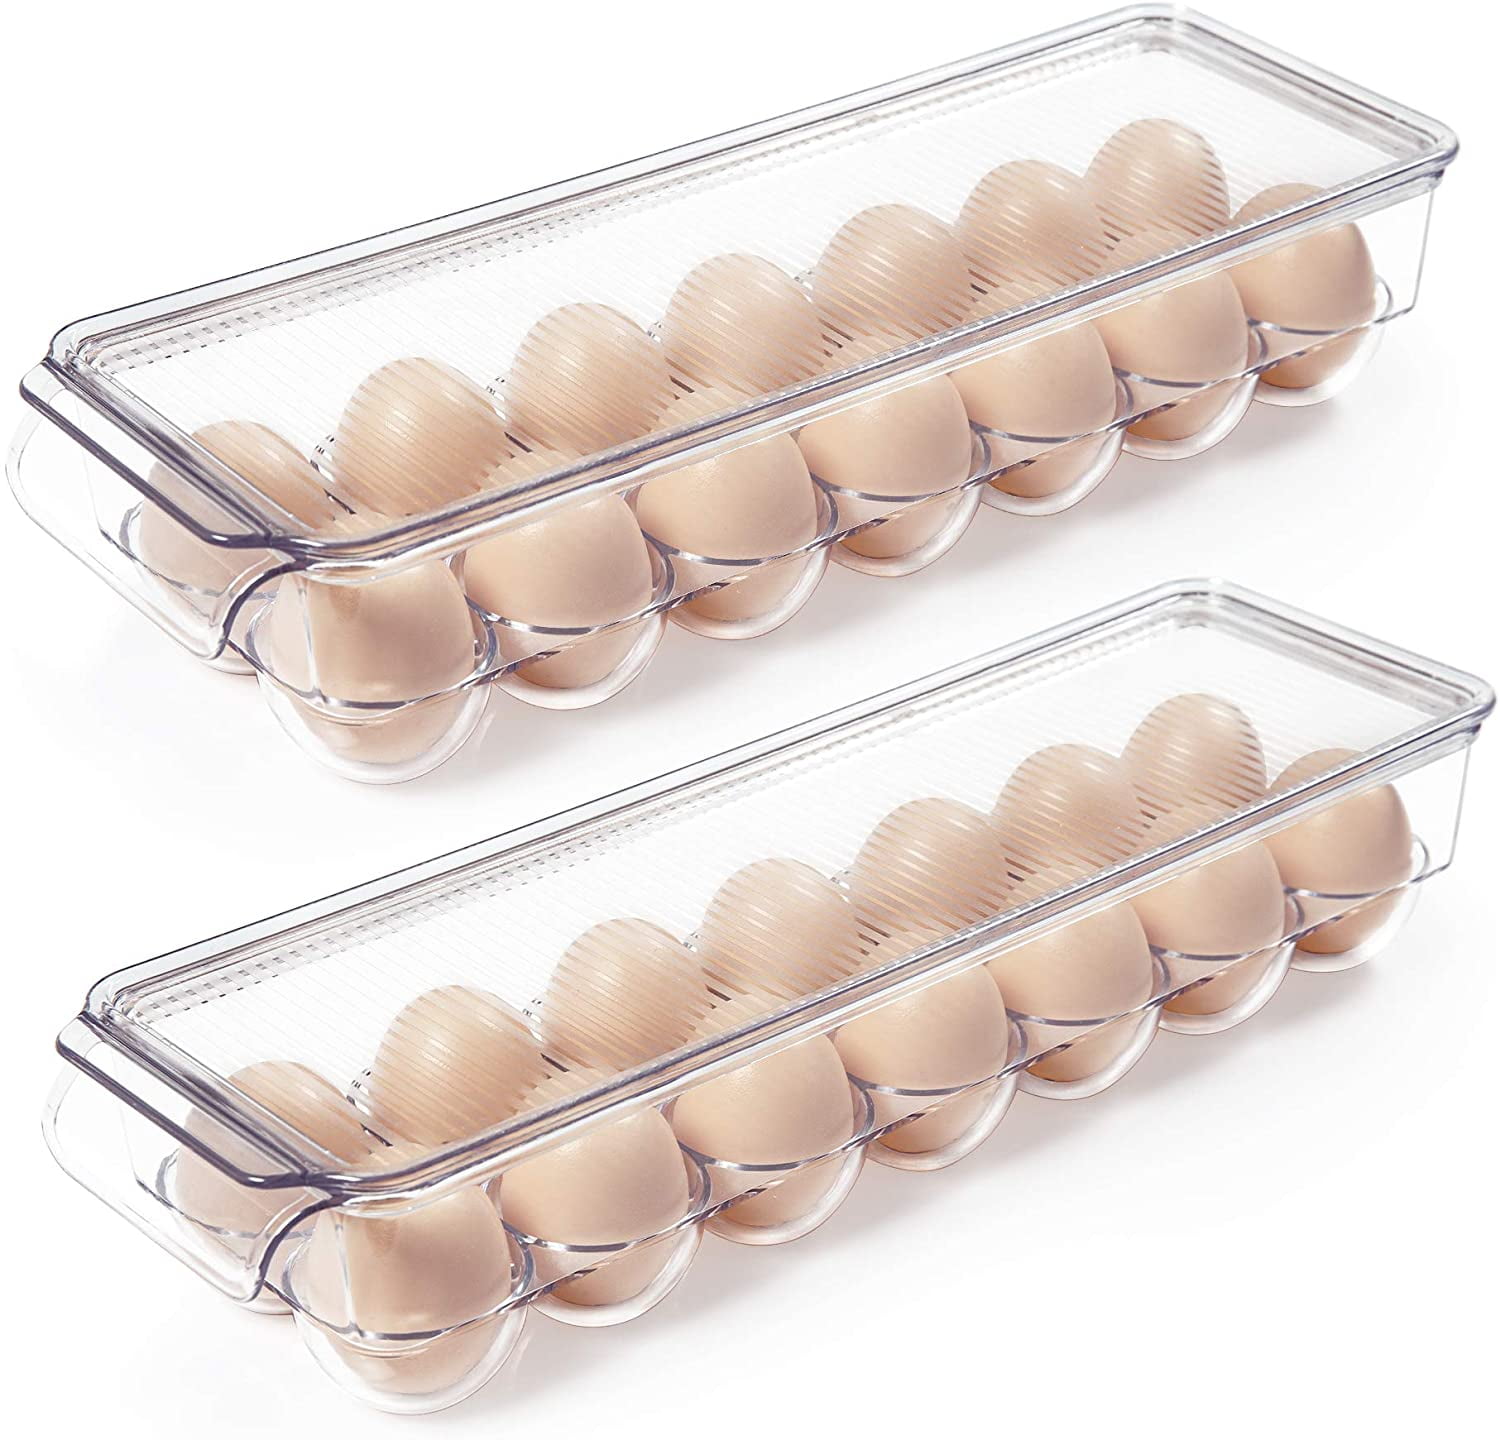 KisSealed 2 Set Refrigerator Egg Holder Stackable Egg Storage Box Coverd Egg Tray Plastic Clear Egg Organizer Container Bins Egg Storage Cartons with Lid 36 Egg Grooves 